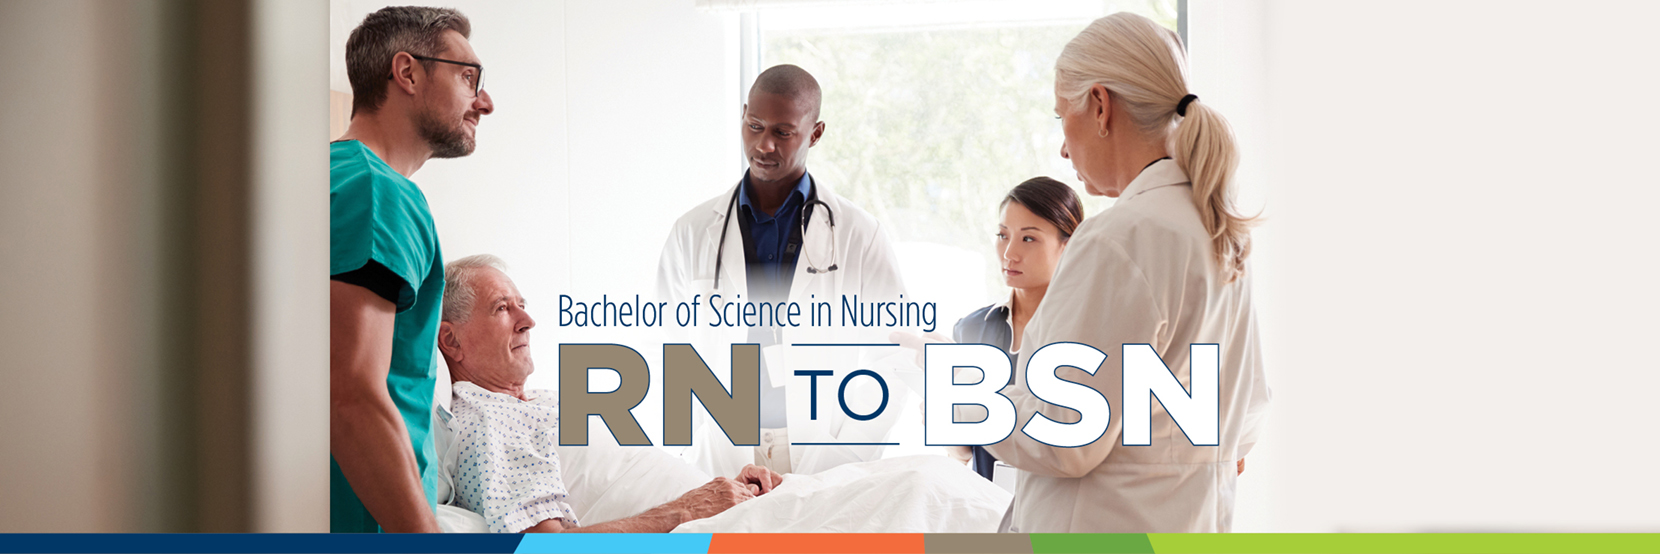 Bachelor of Science in Nursing RN to BSN degree